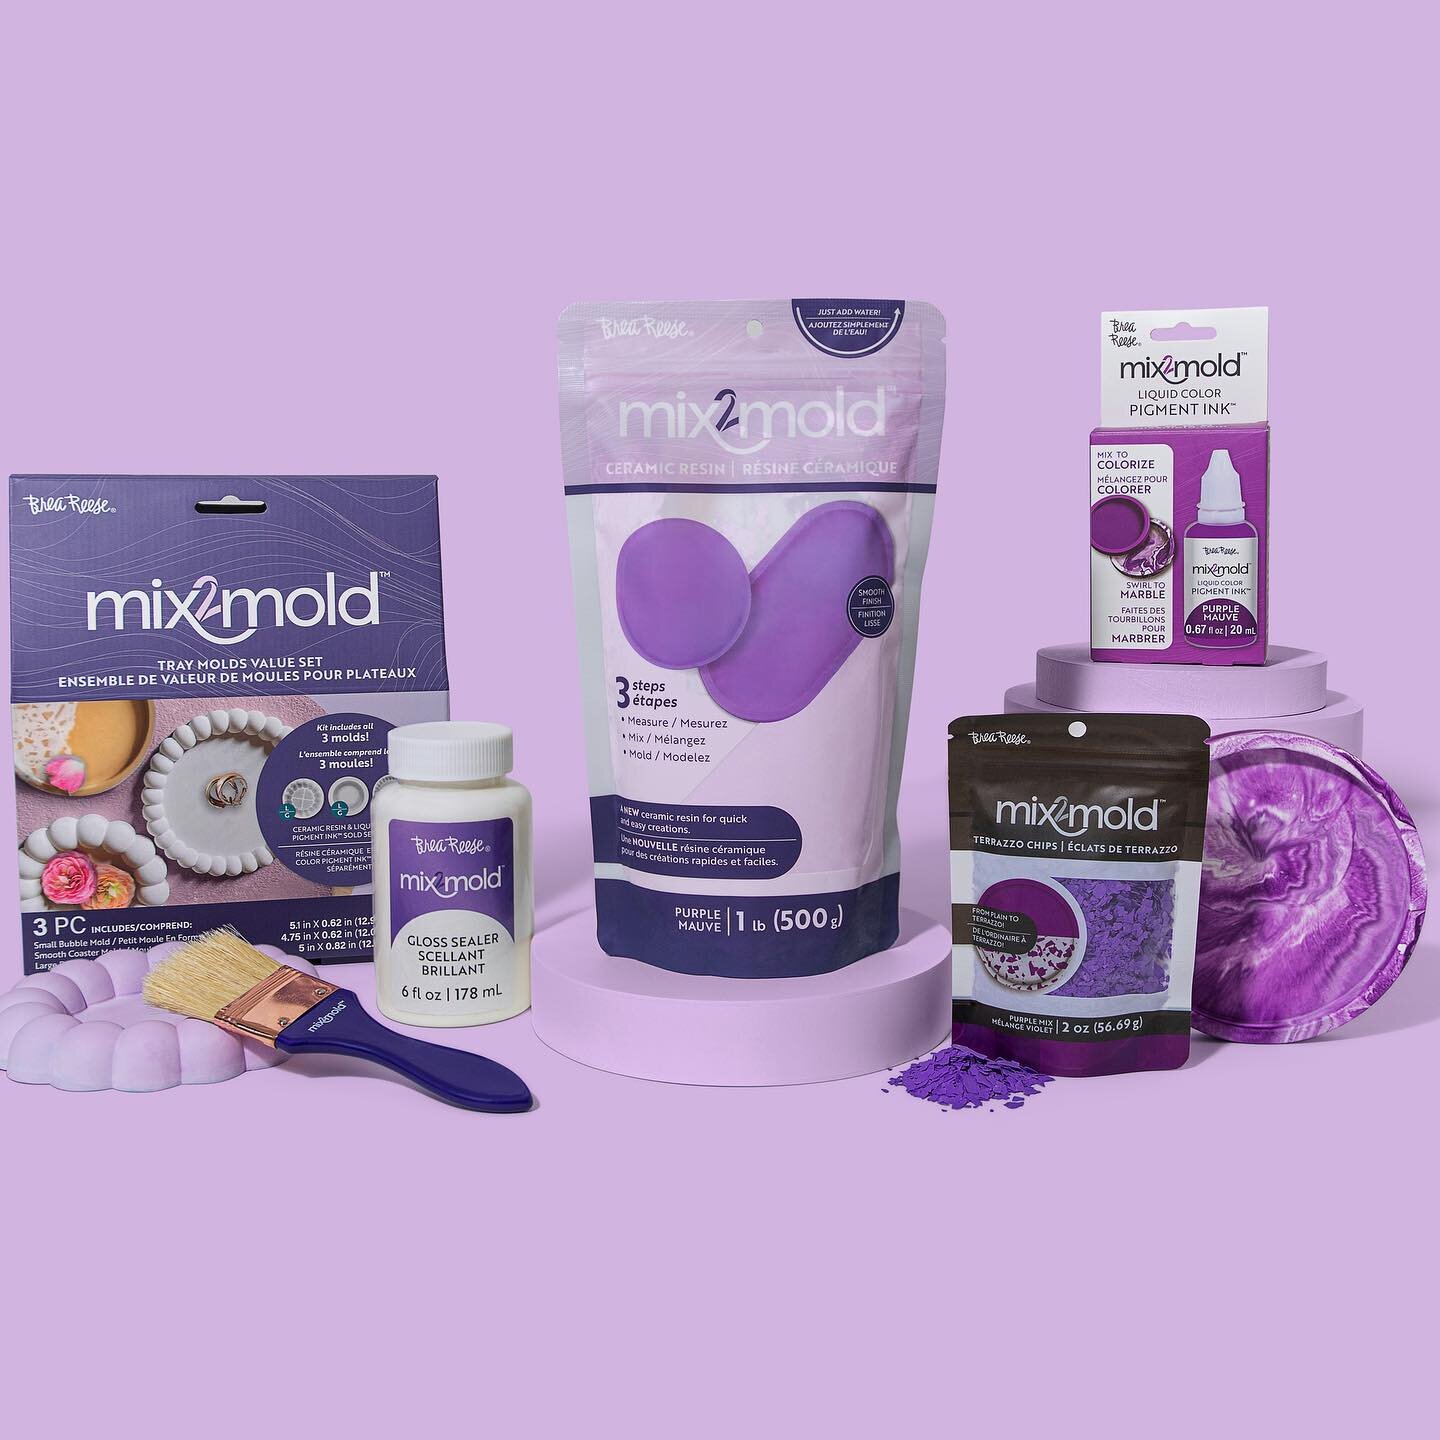 We are beyond excited to introduce to our community, our newest product line, Mix2Mold Ceramic Resin! This traditional resin-alternative dries perfectly smooth in under an hour and is non-toxic! Click the link in our bio to see our full product line 